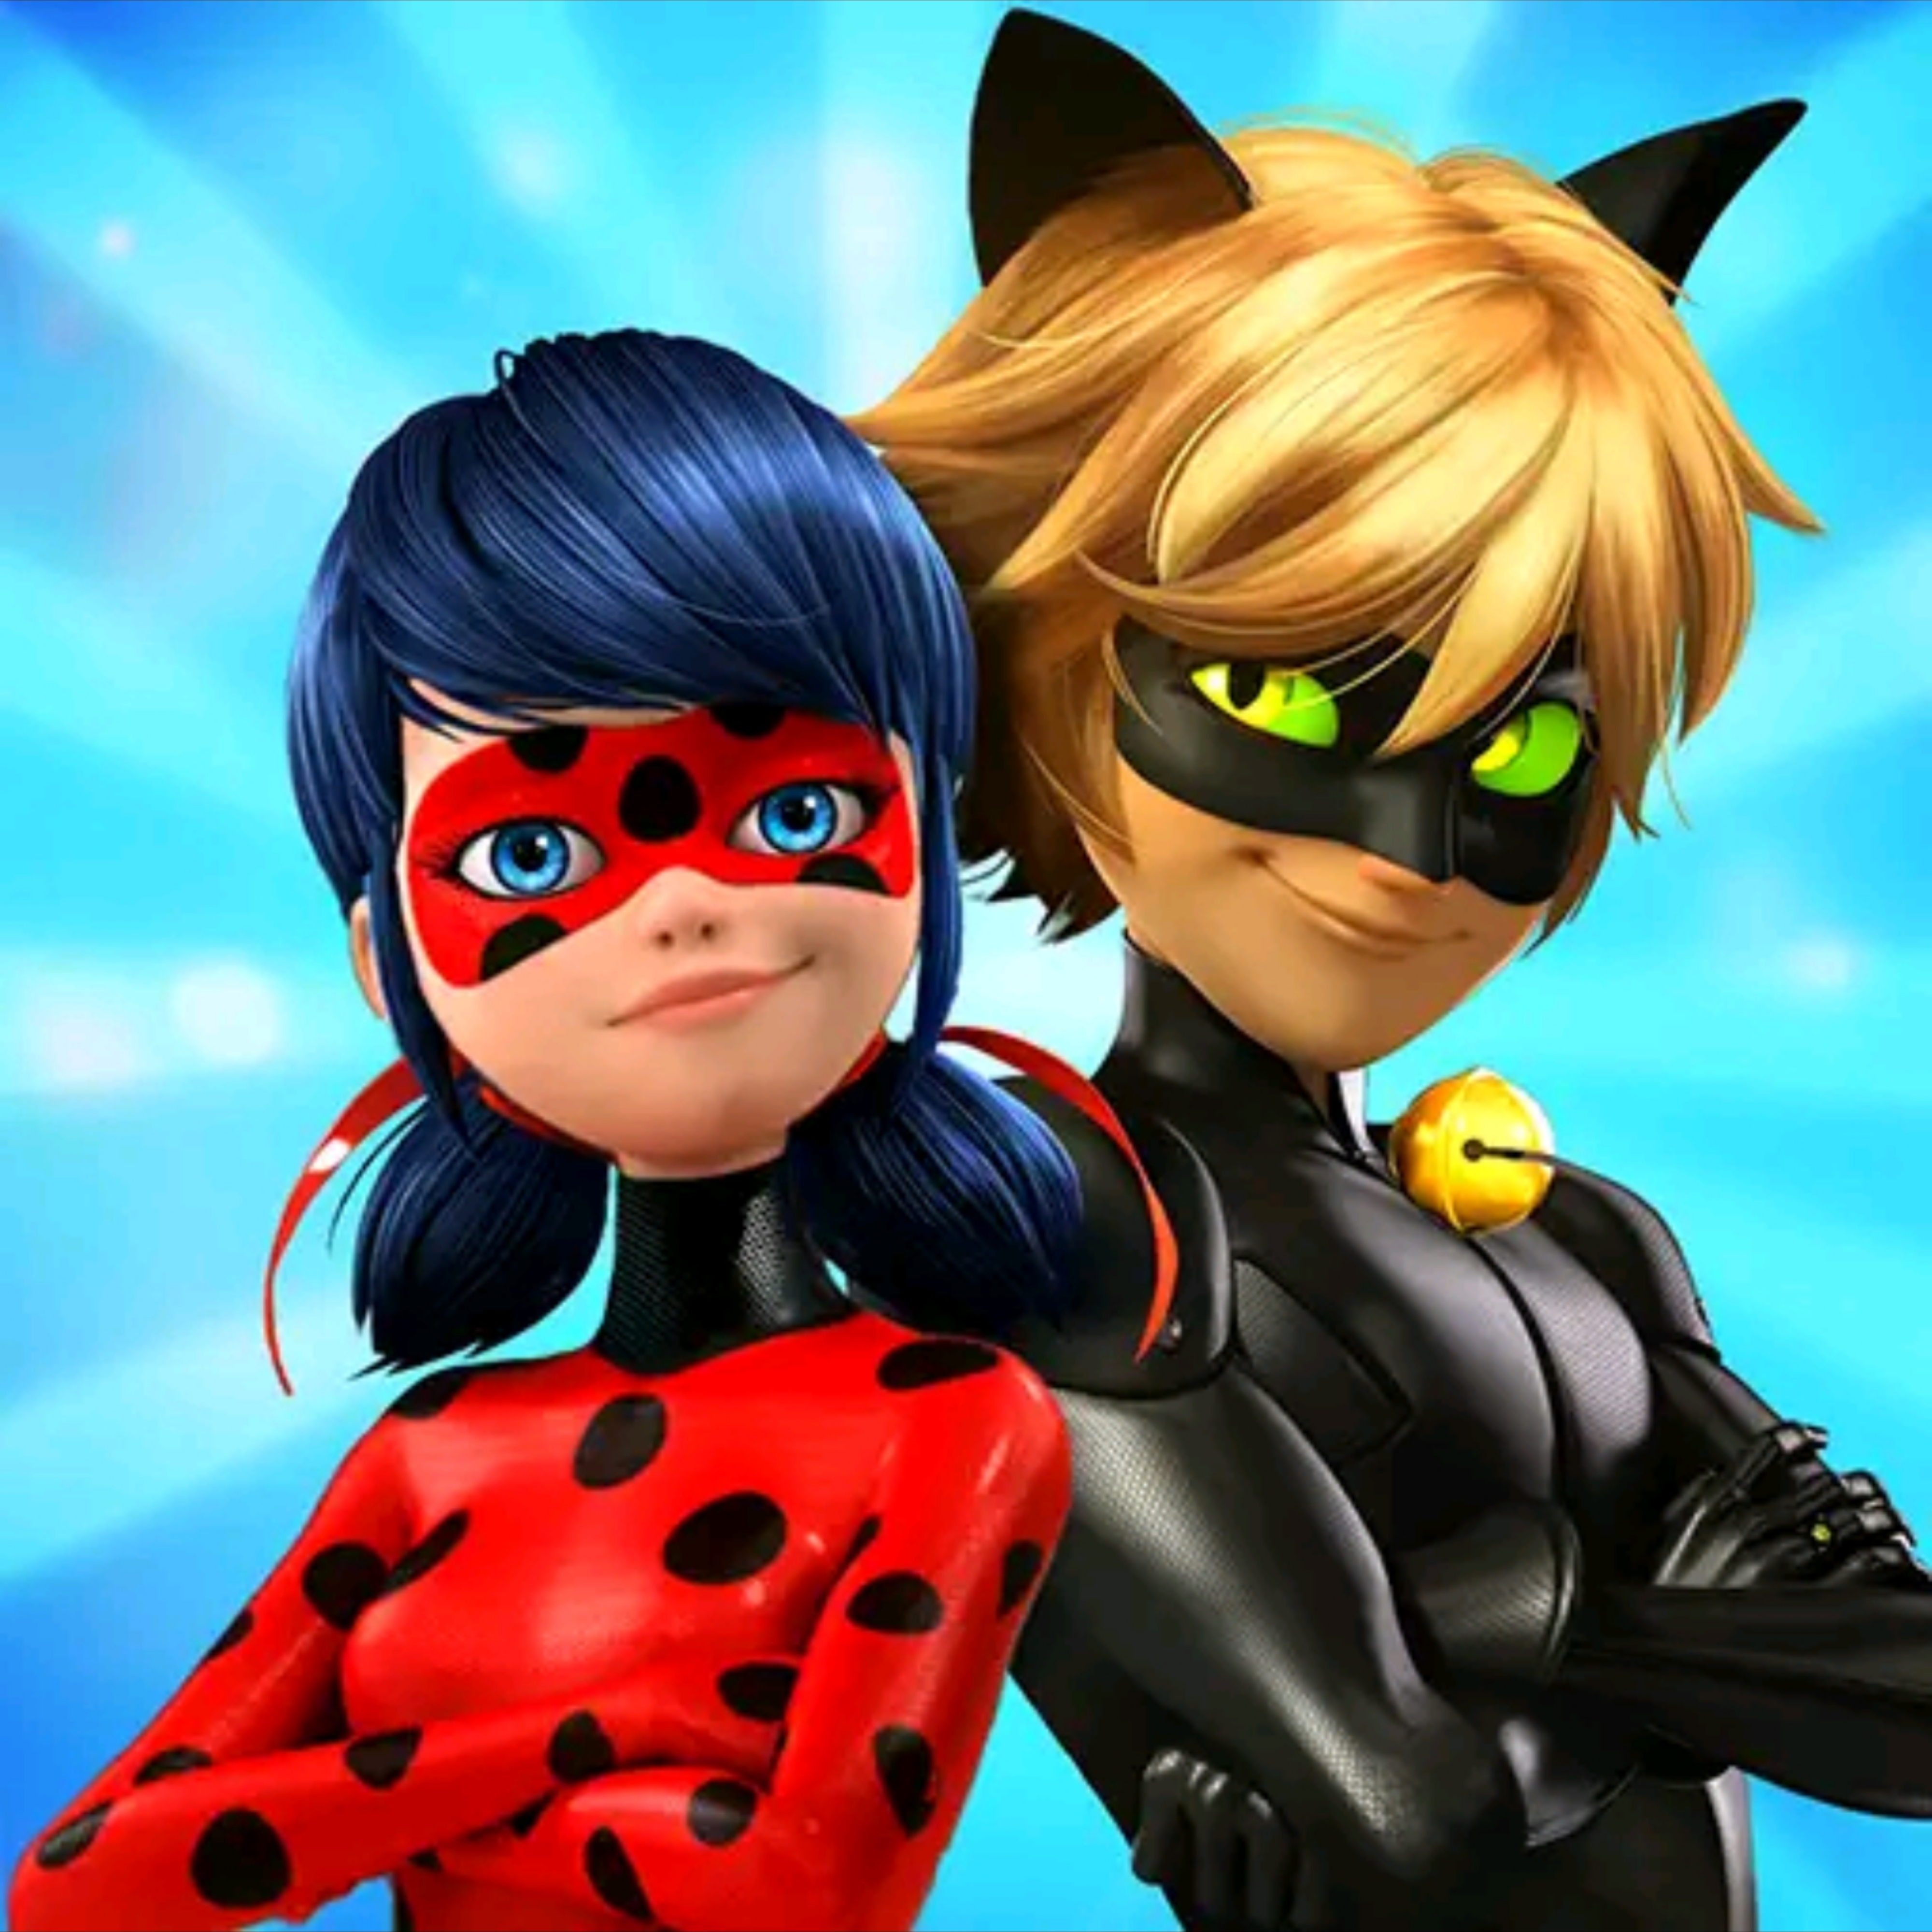 https://static.wikia.nocookie.net/lady-bug/images/e/e2/Miraculous_Ladybug_%26_Cat_Noir_new_second_icon.jpg/revision/latest?cb=20231211231637